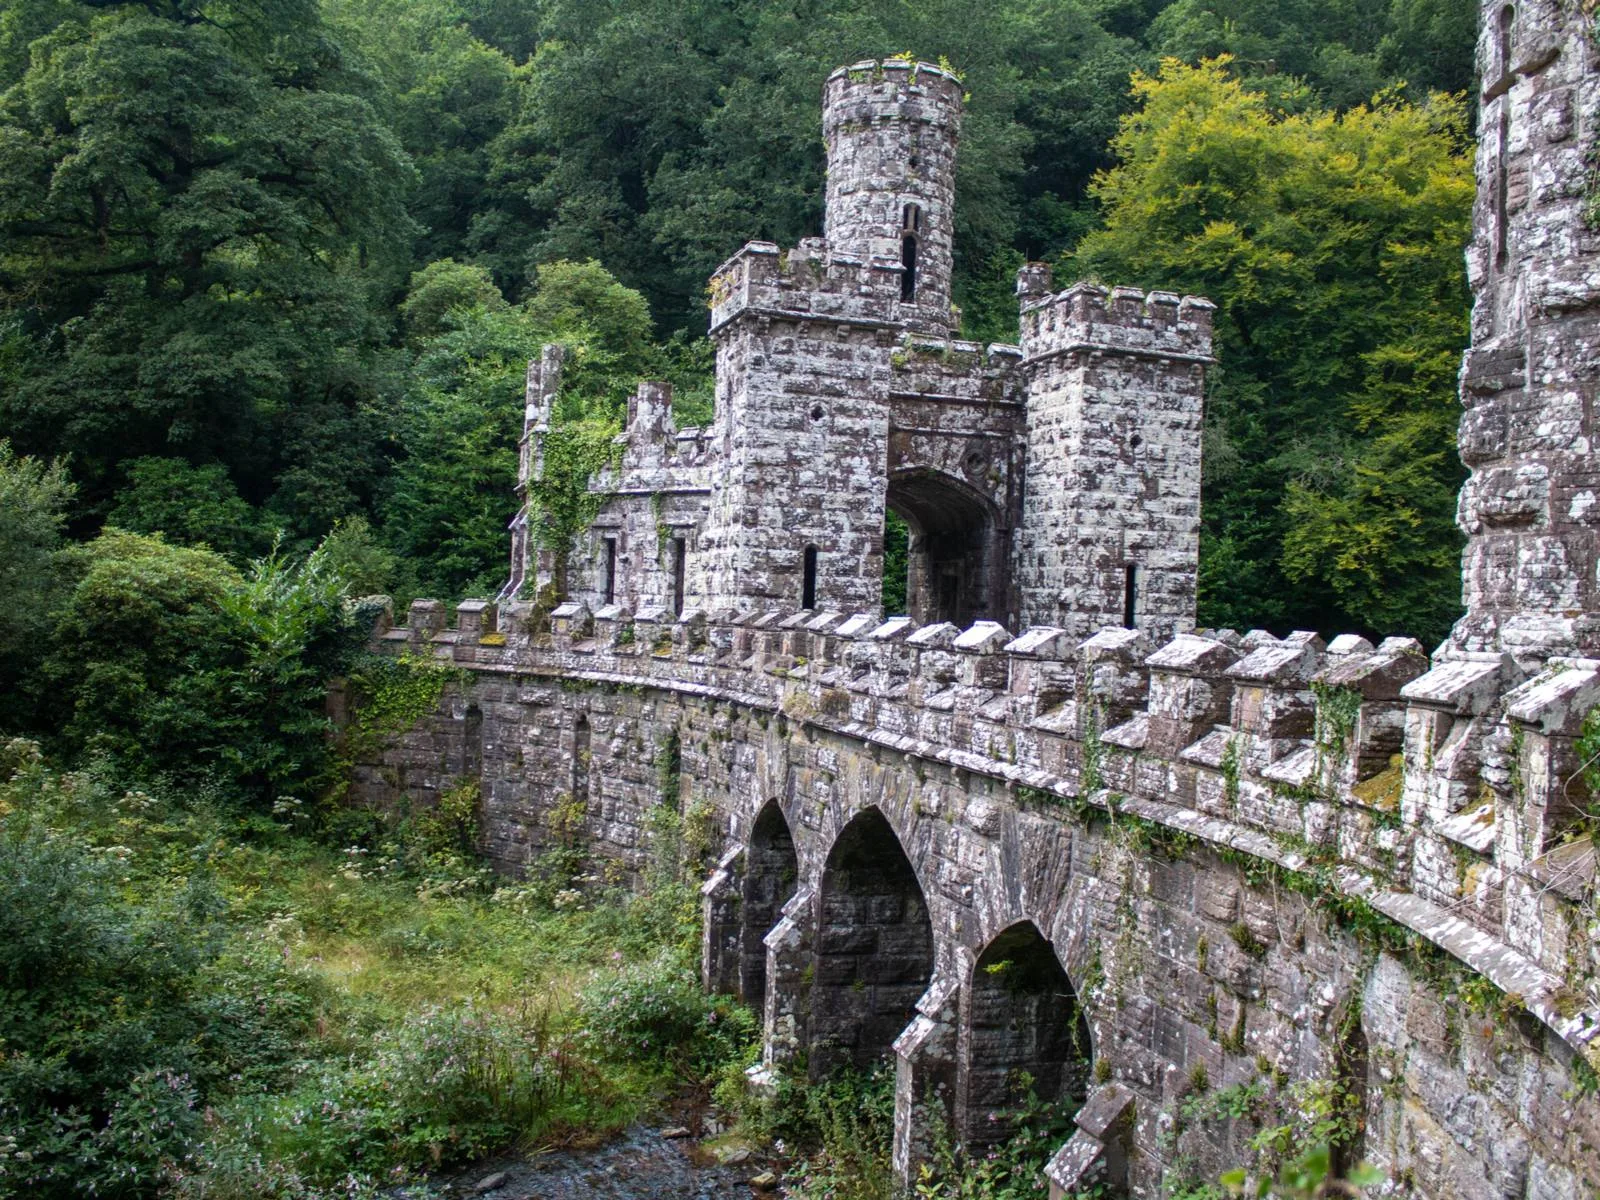 The historic Ballysaggartmore Towers near the Lismore woodland in Waterford is one of the best places to visit in Ireland